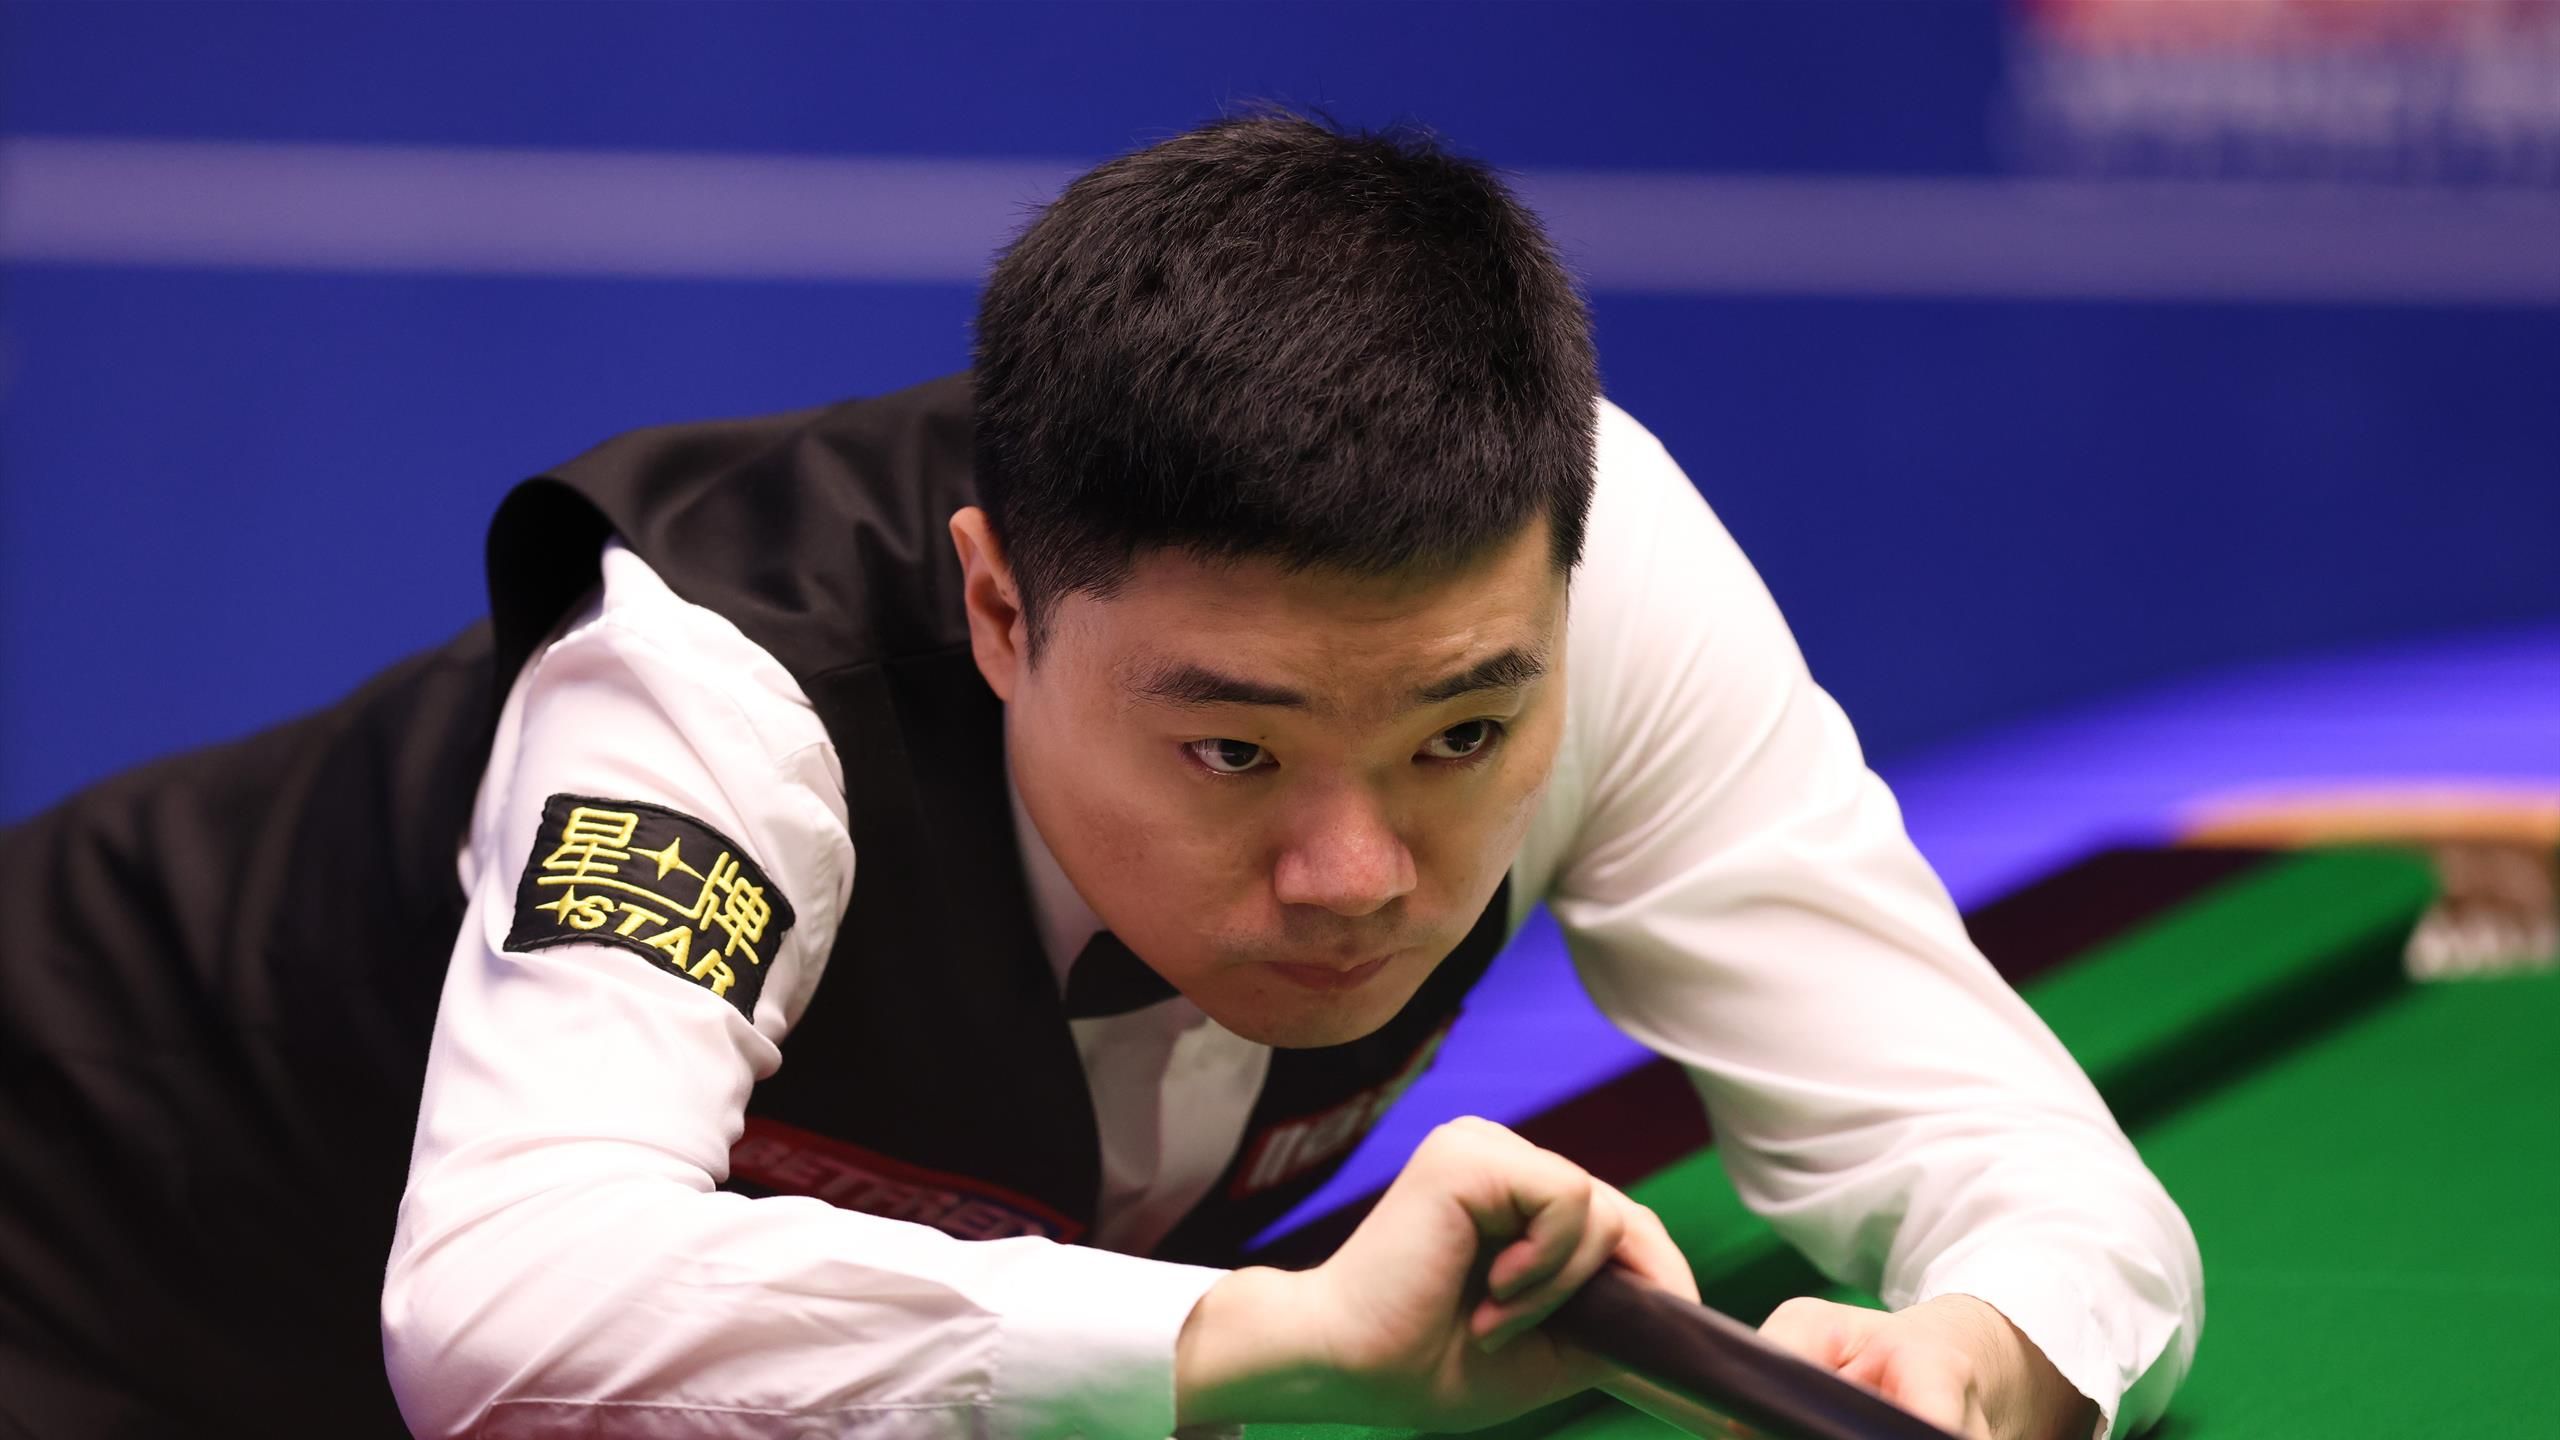 On the pioneering work of Ding Junhui and how one gamble transformed a sport and inspired a generation